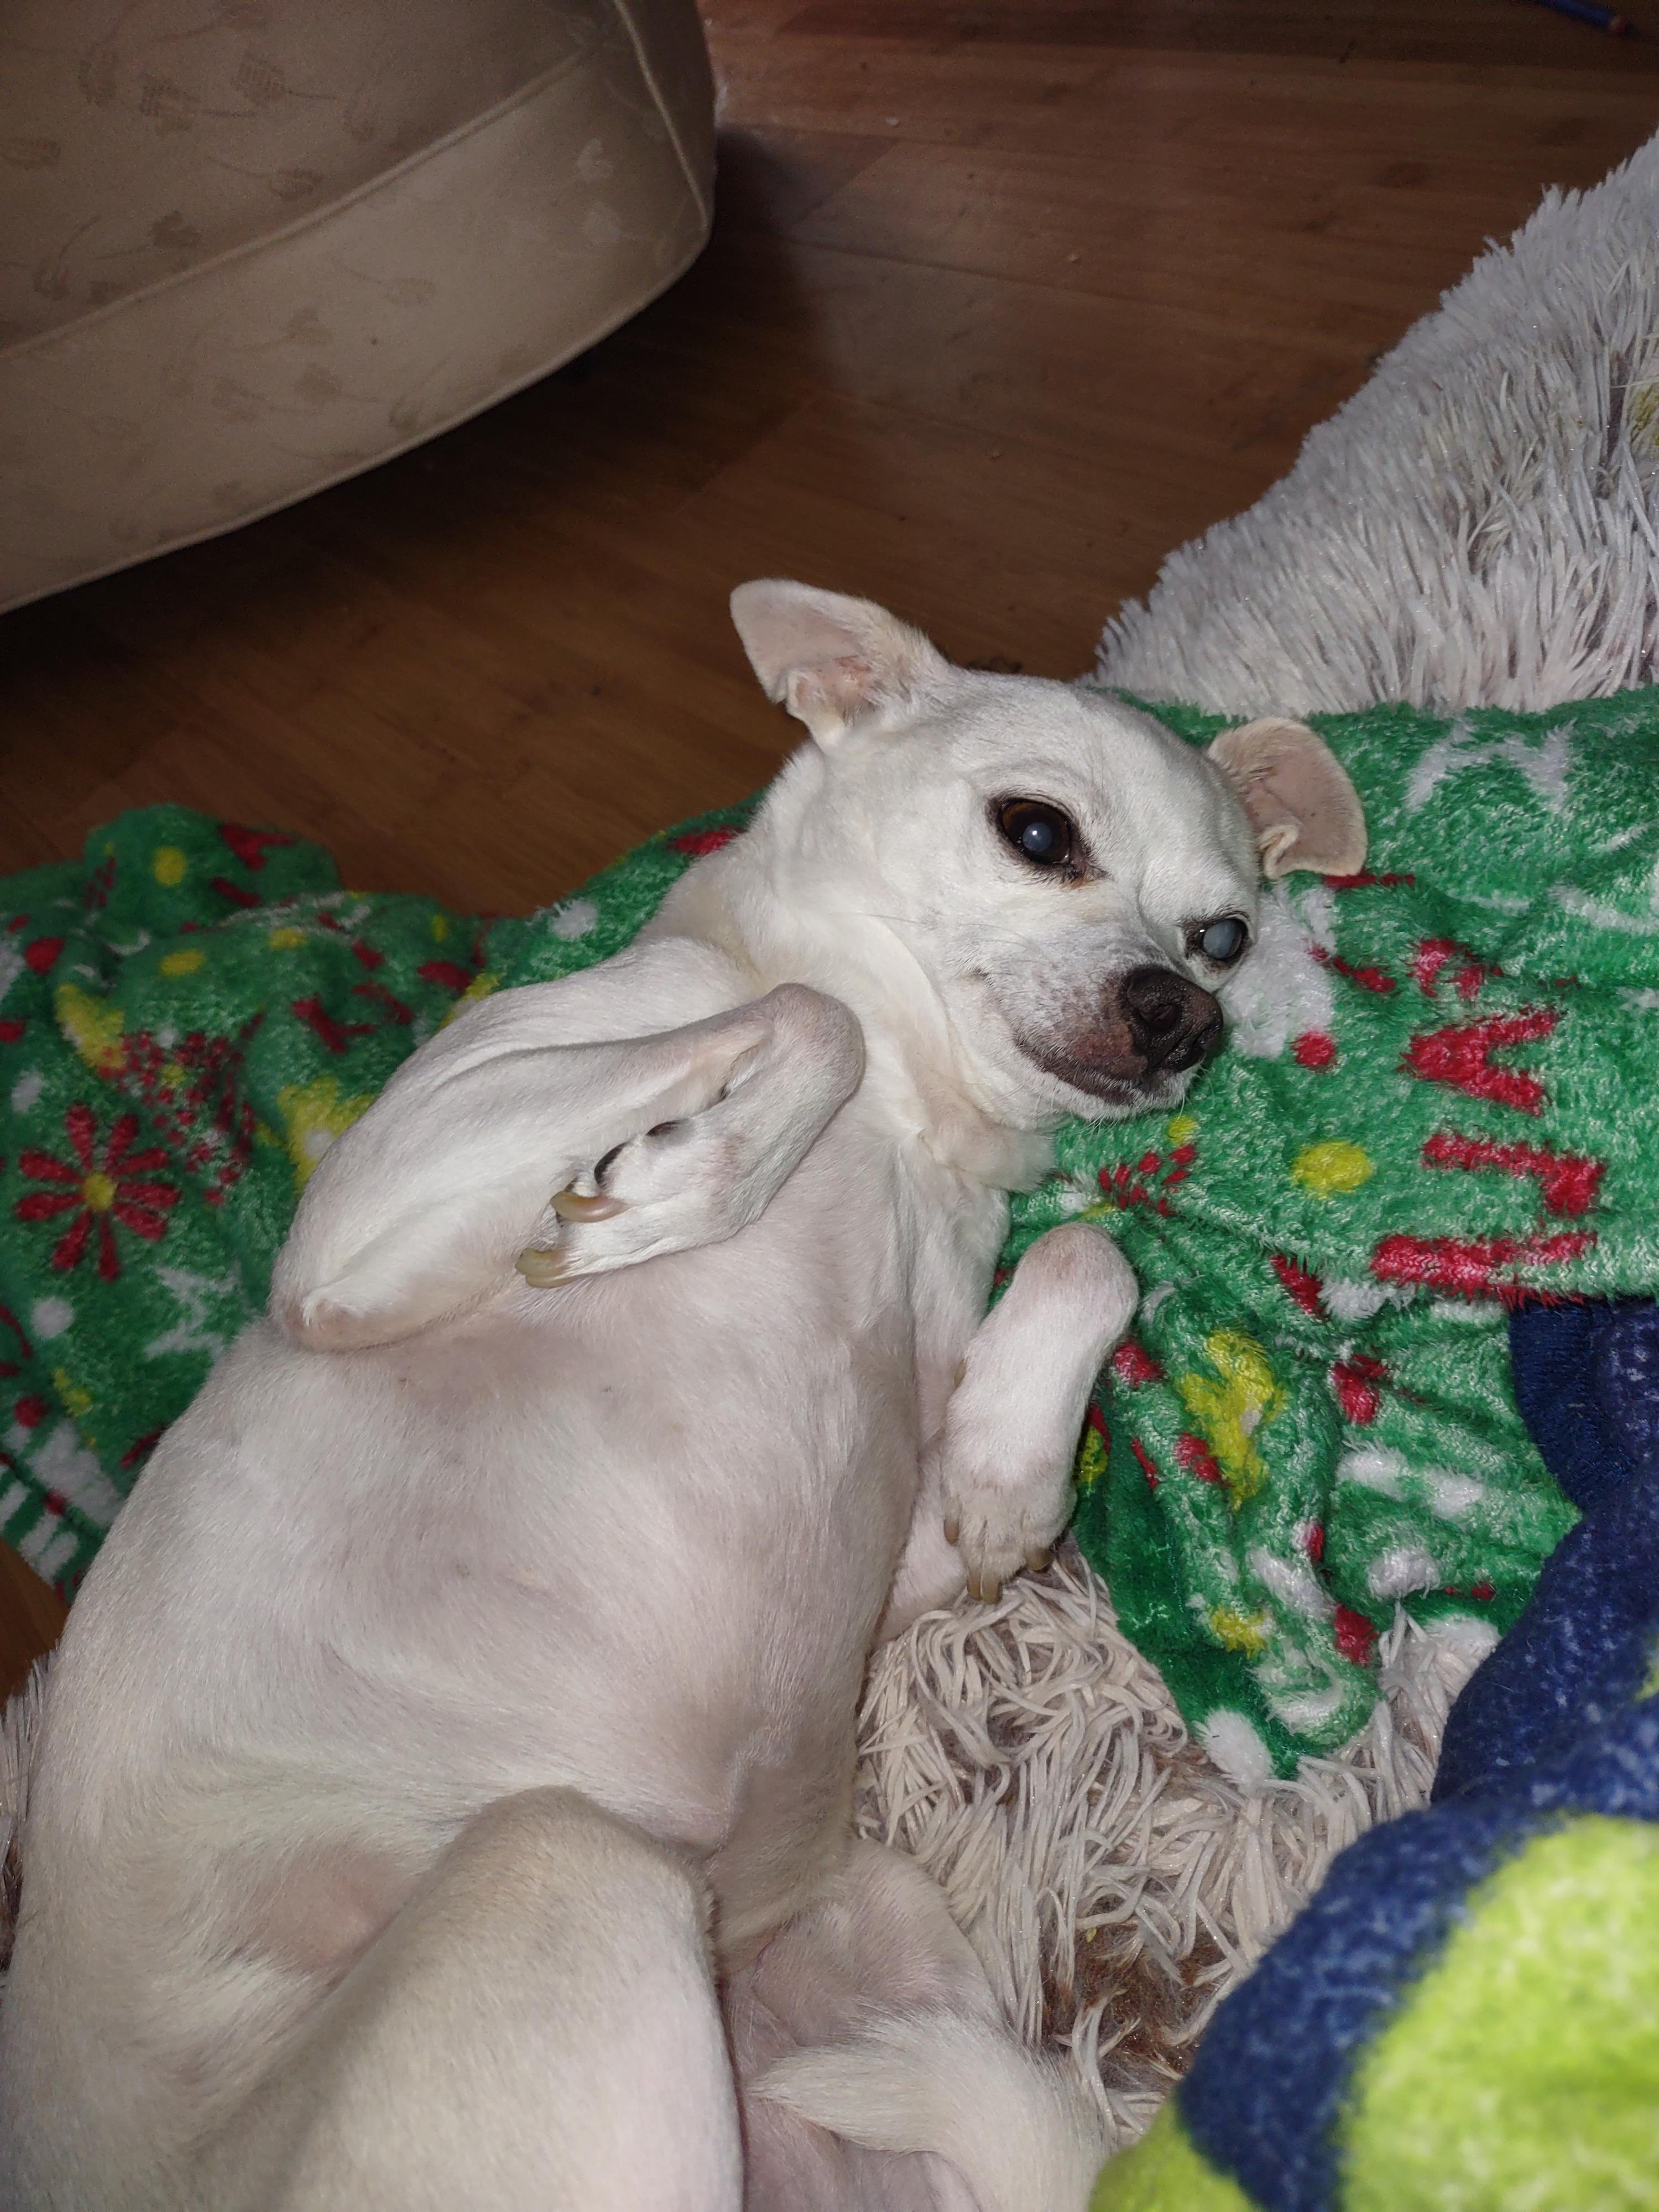 White dog lying on layers of blankets